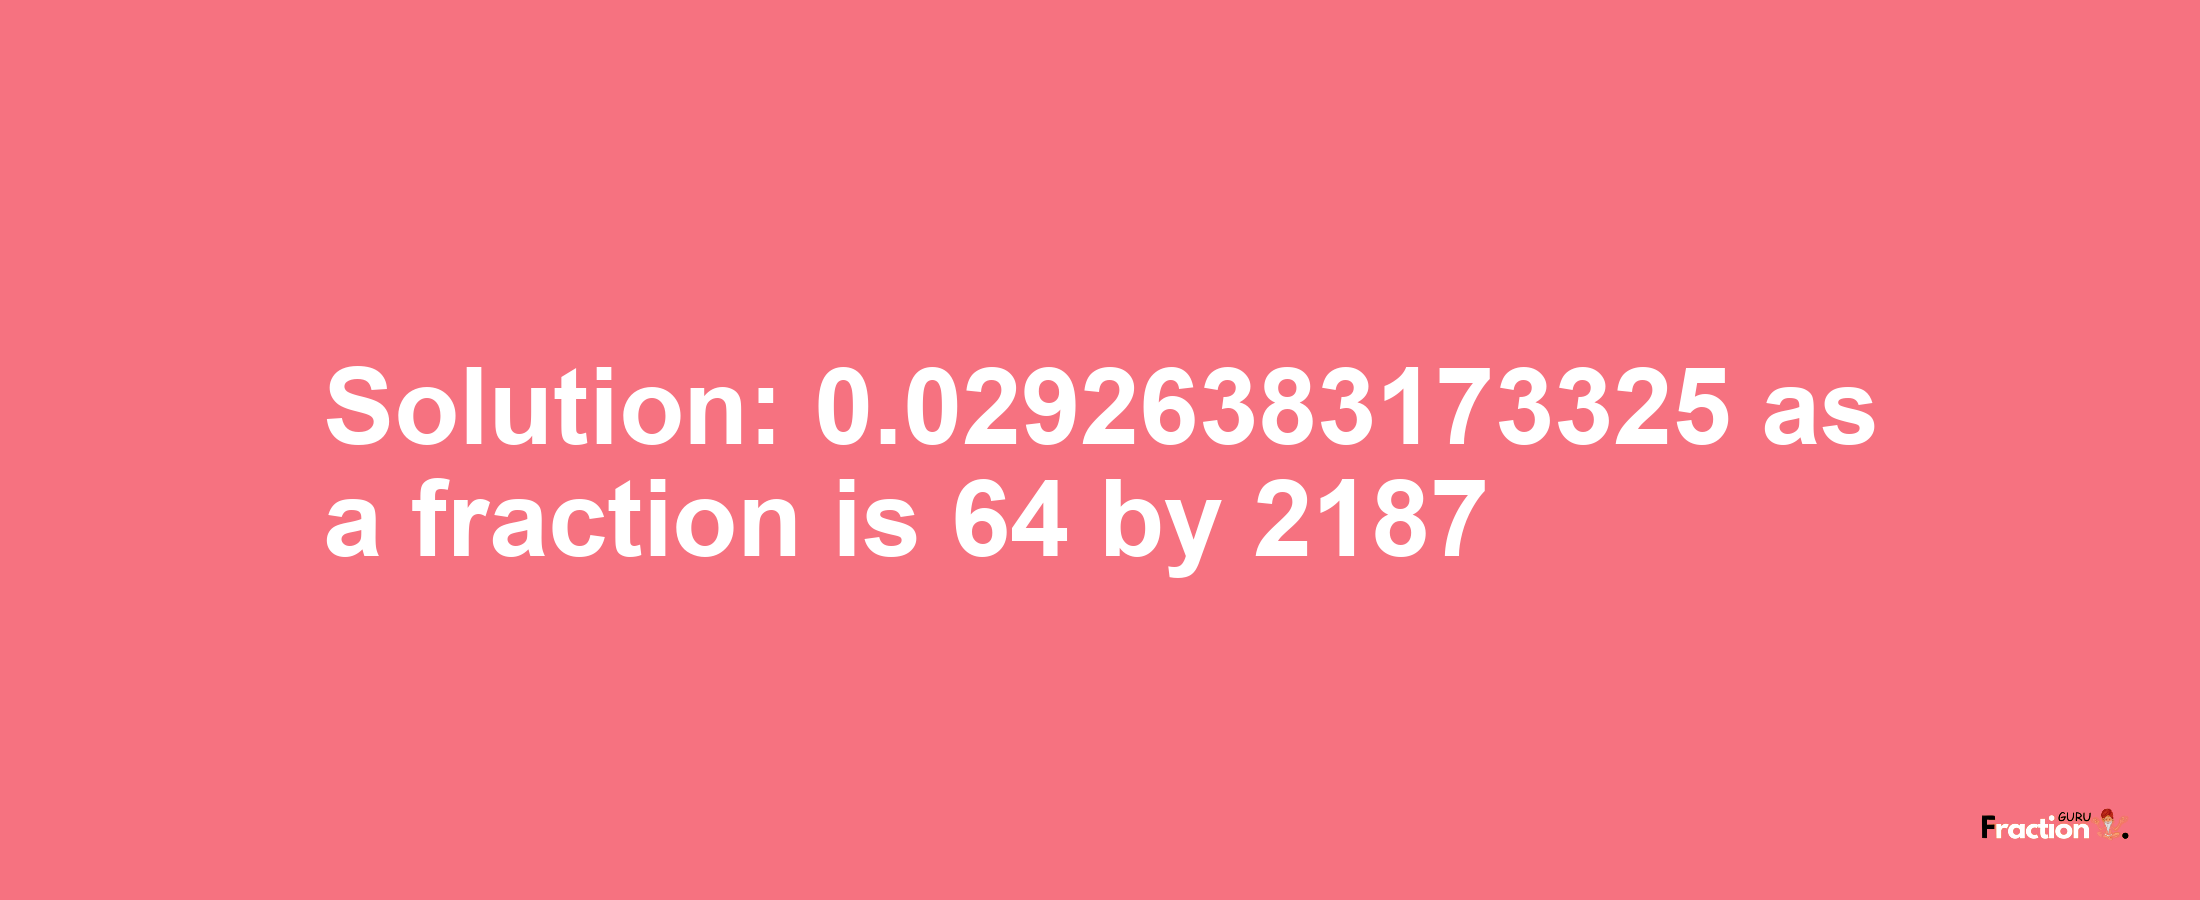 Solution:0.02926383173325 as a fraction is 64/2187